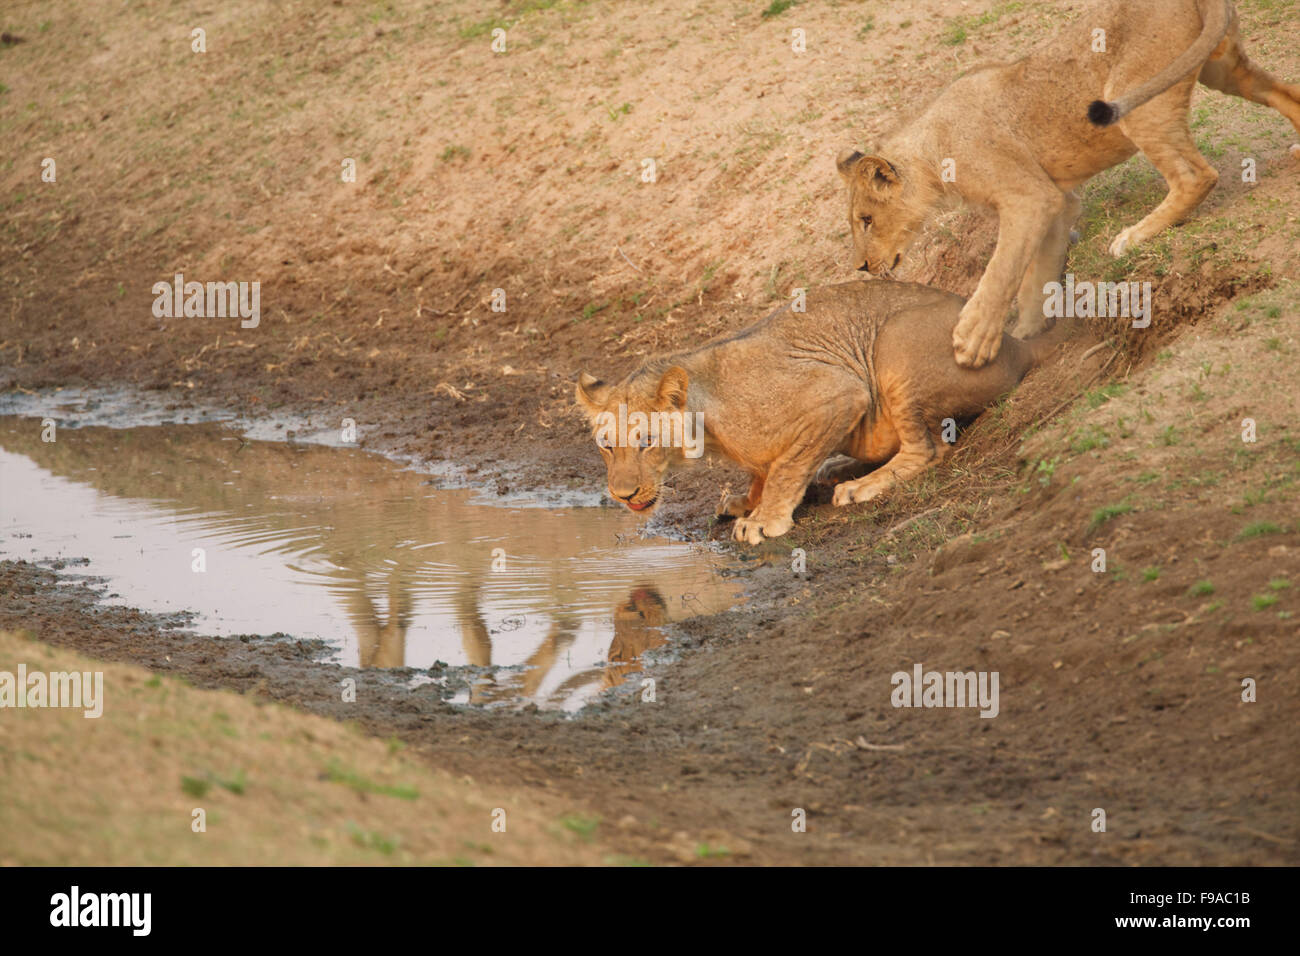 Lions drinking from a waterhole Stock Photo